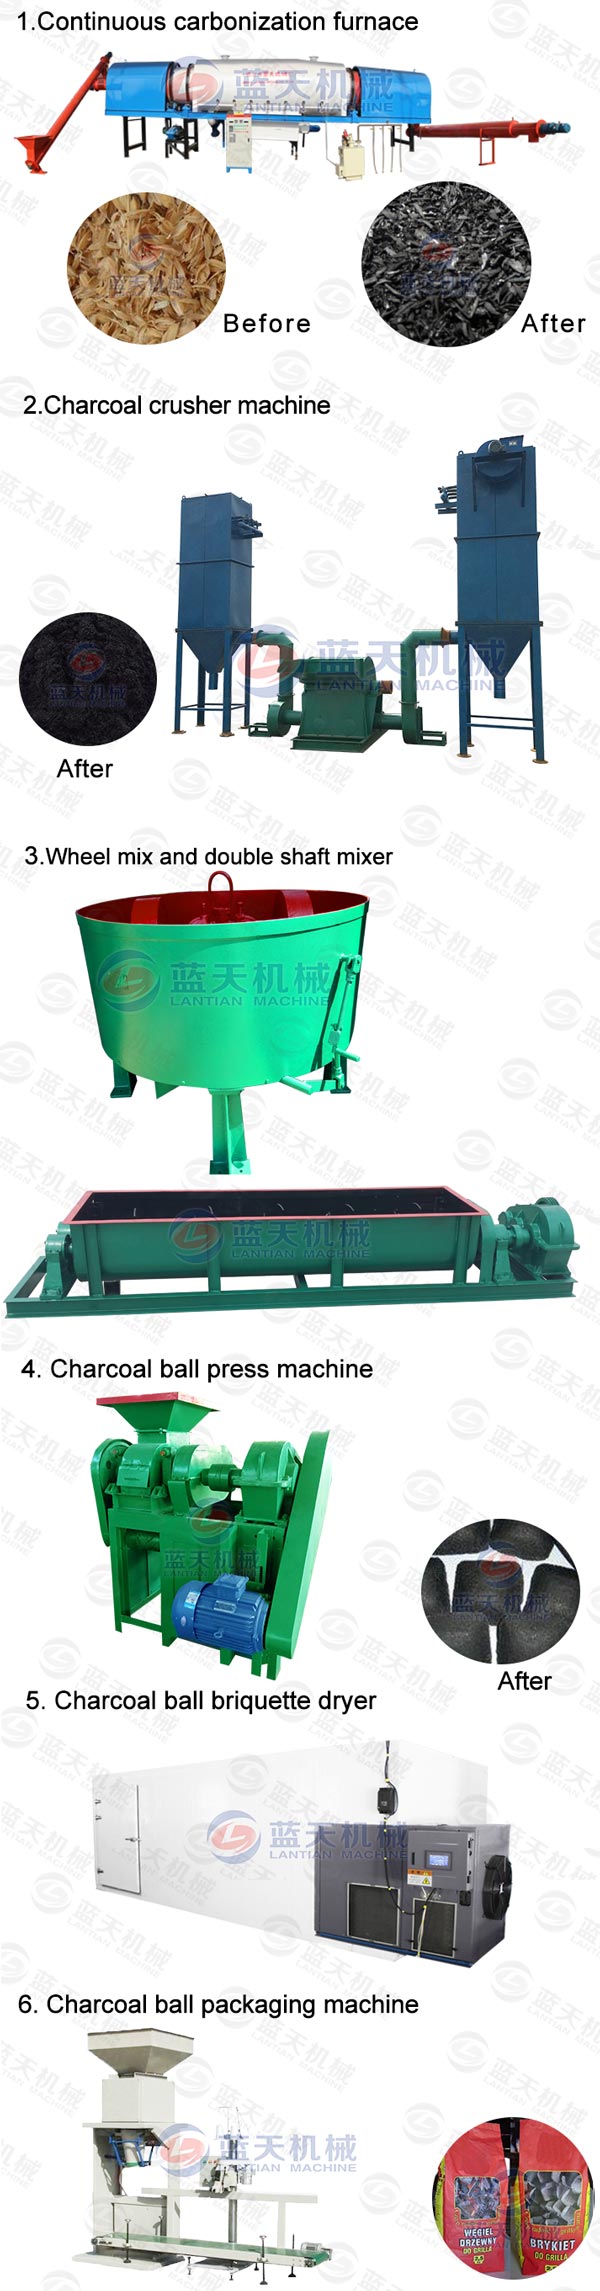 Product line of charcoal packaging machine